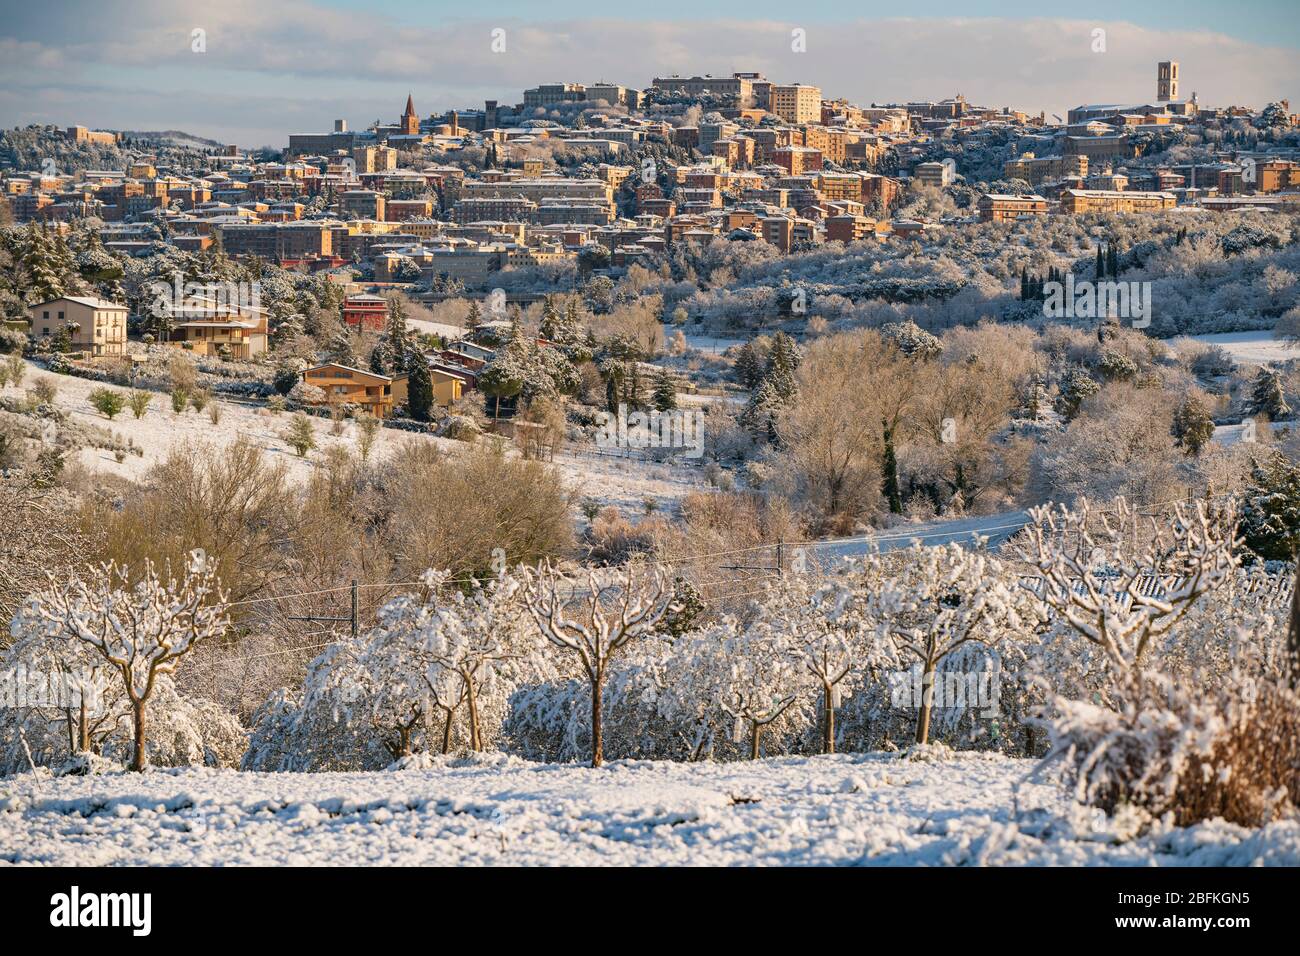 Perugia, Umbria, Italy. Evocative winter view with snow of Perugia with its skyline surrounded by the countryside. Umbria is the green heart of Italy. Stock Photo